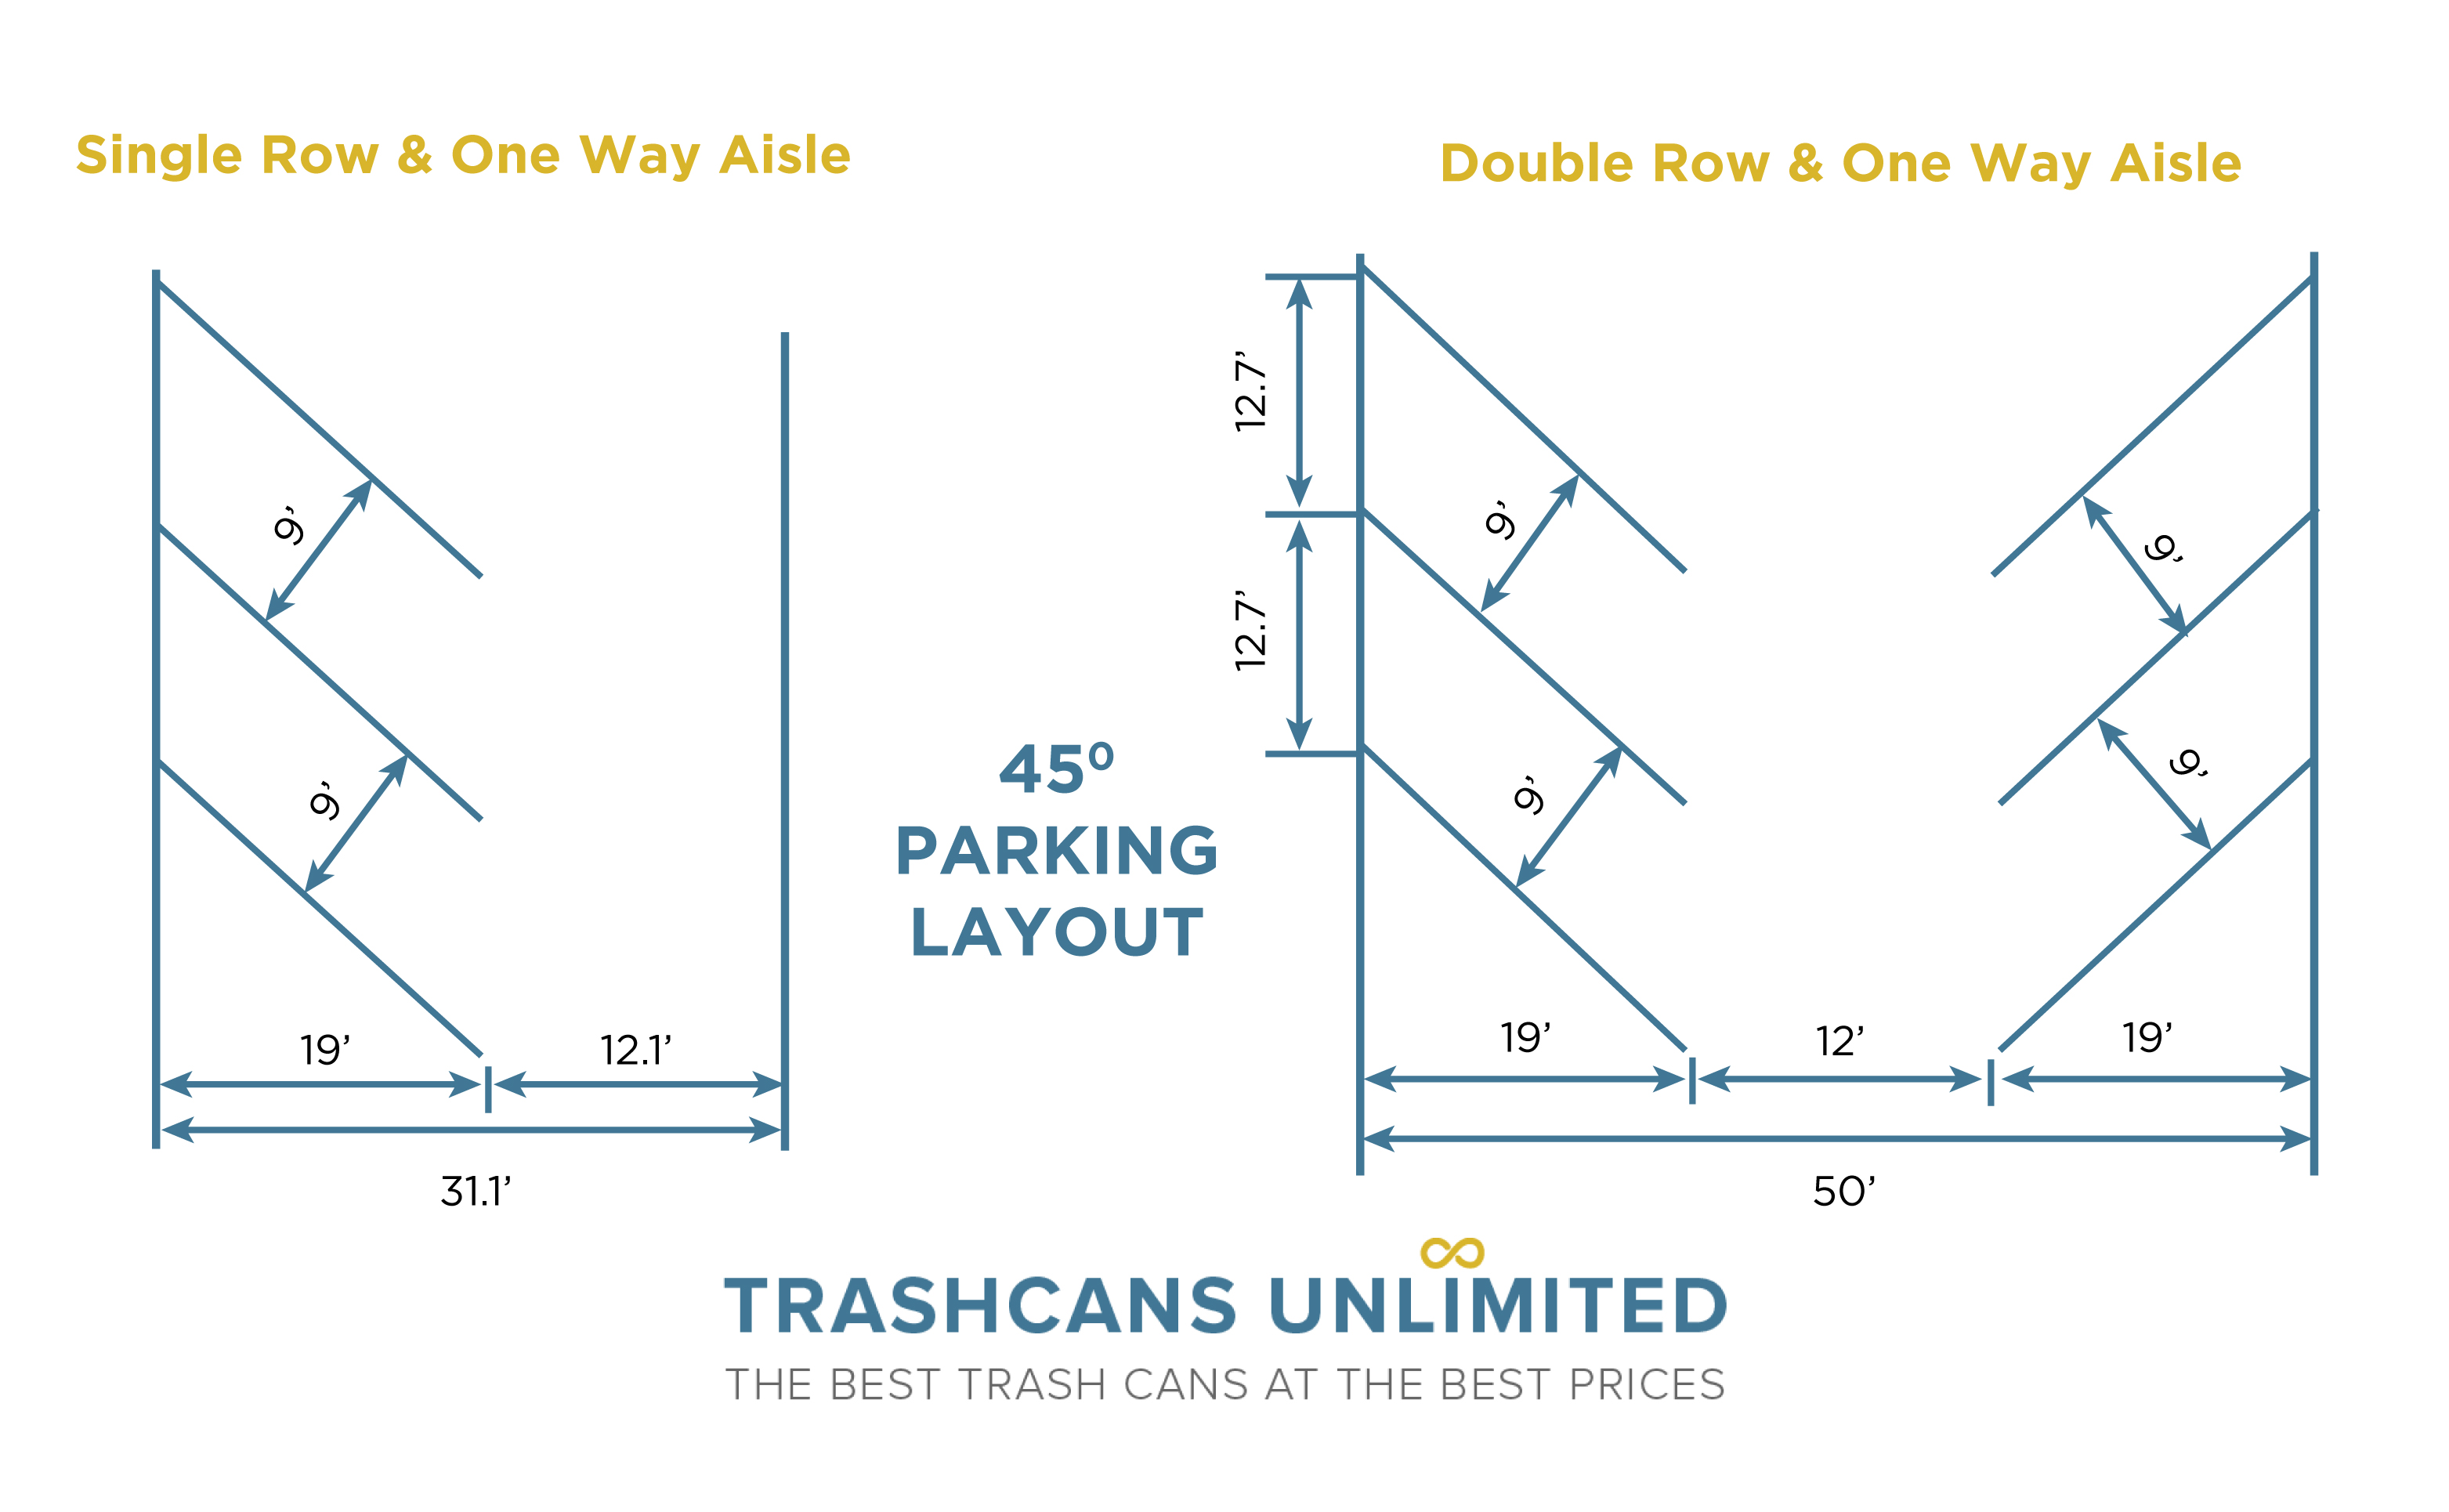 Parking Lot Layouts & Templates - Trash Cans Unlimited